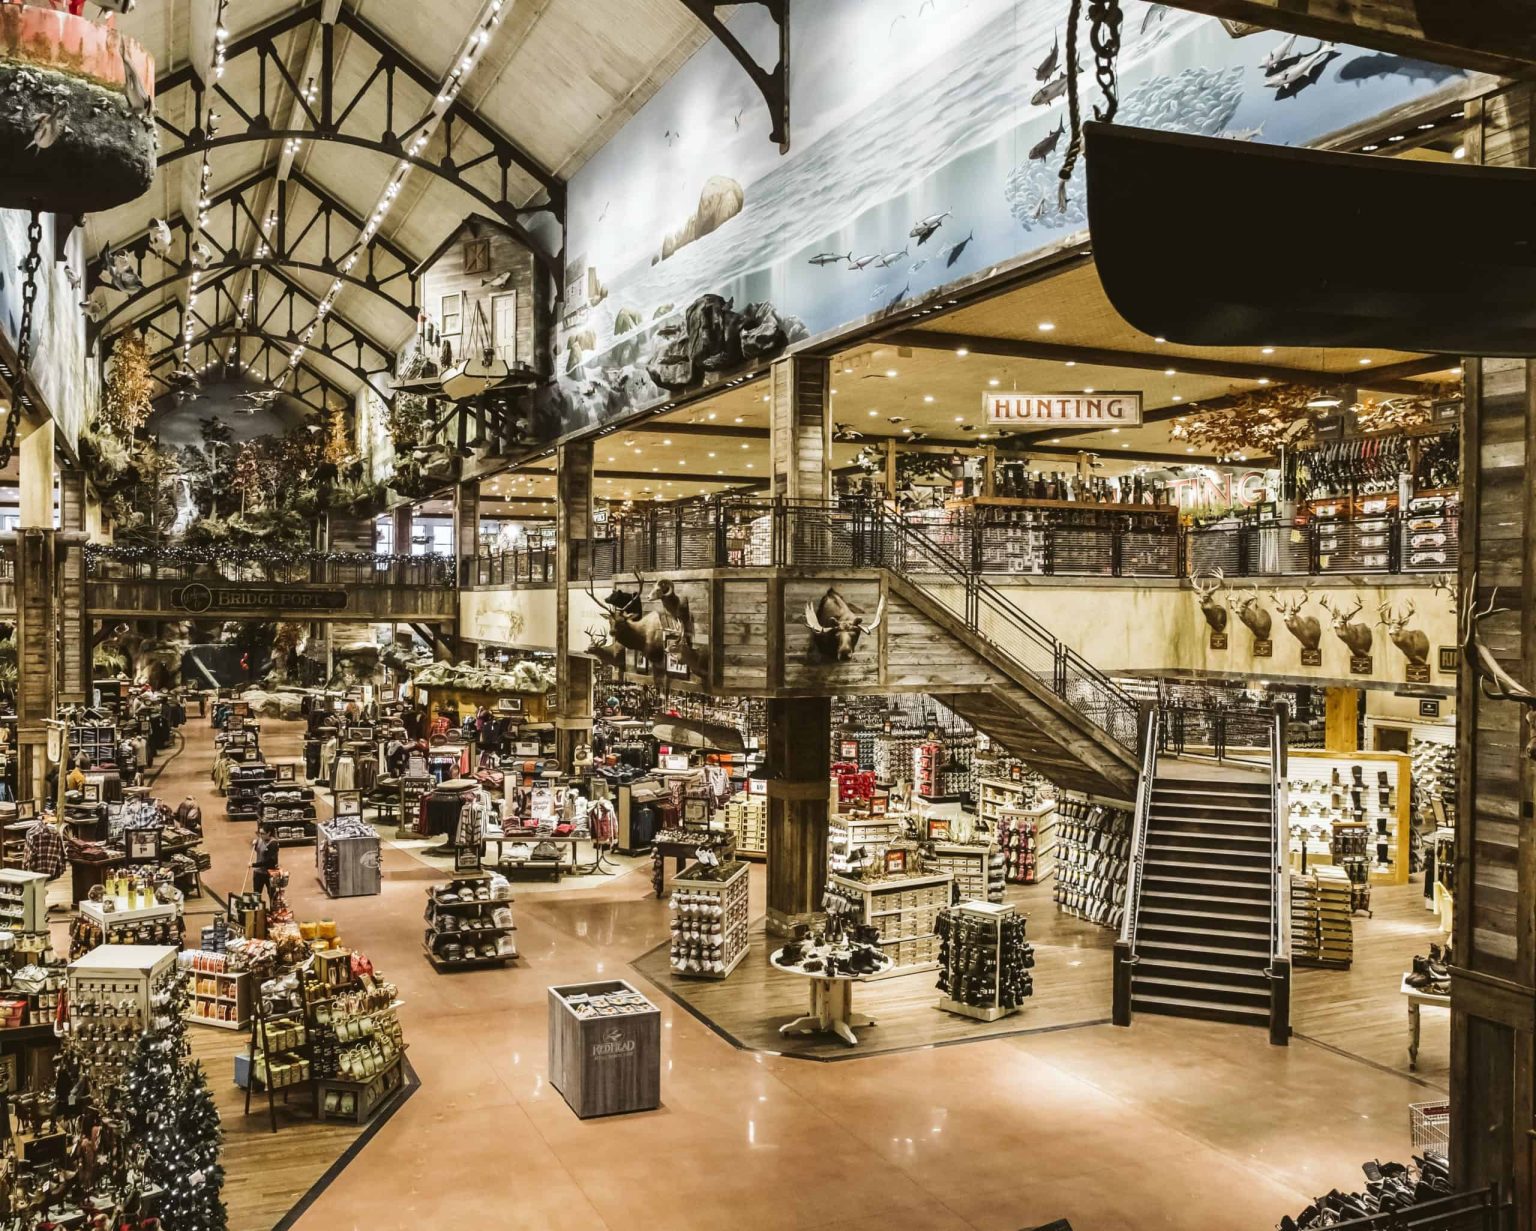 Updated Bass Pro Hours of Operations!